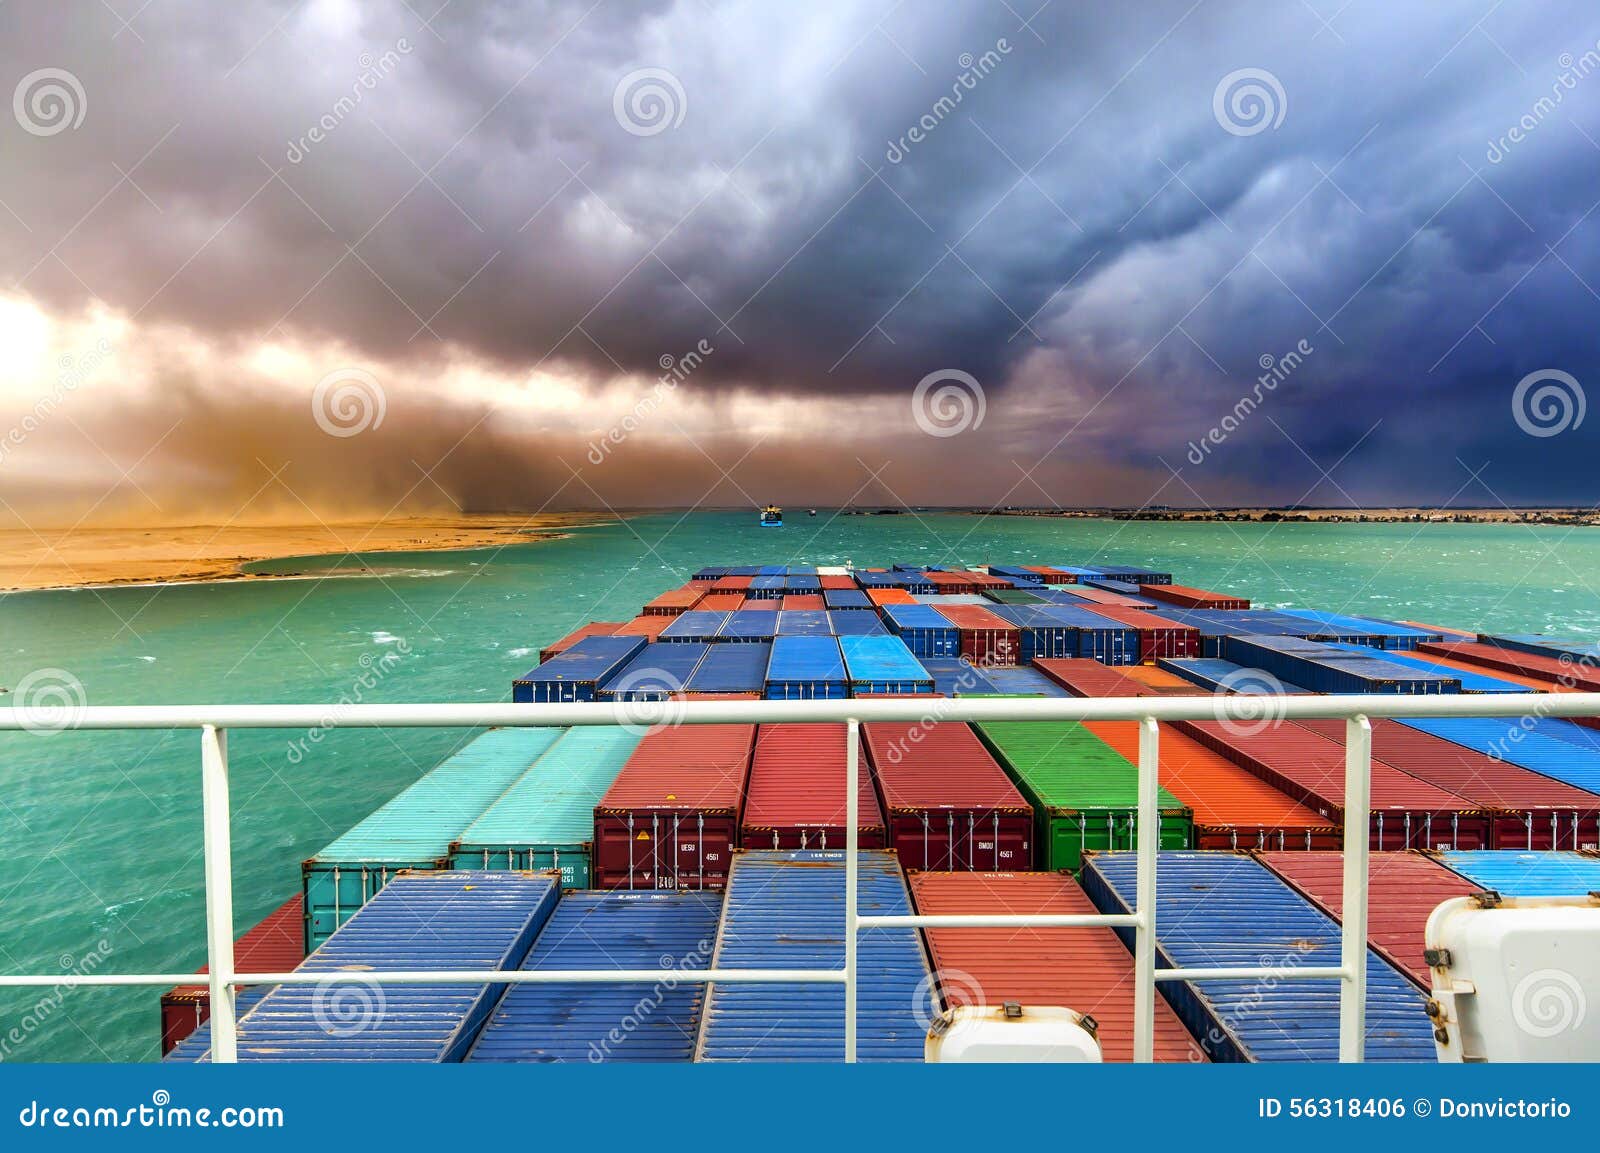 desert storm in suez canal, egypt. large container ship in convoy.